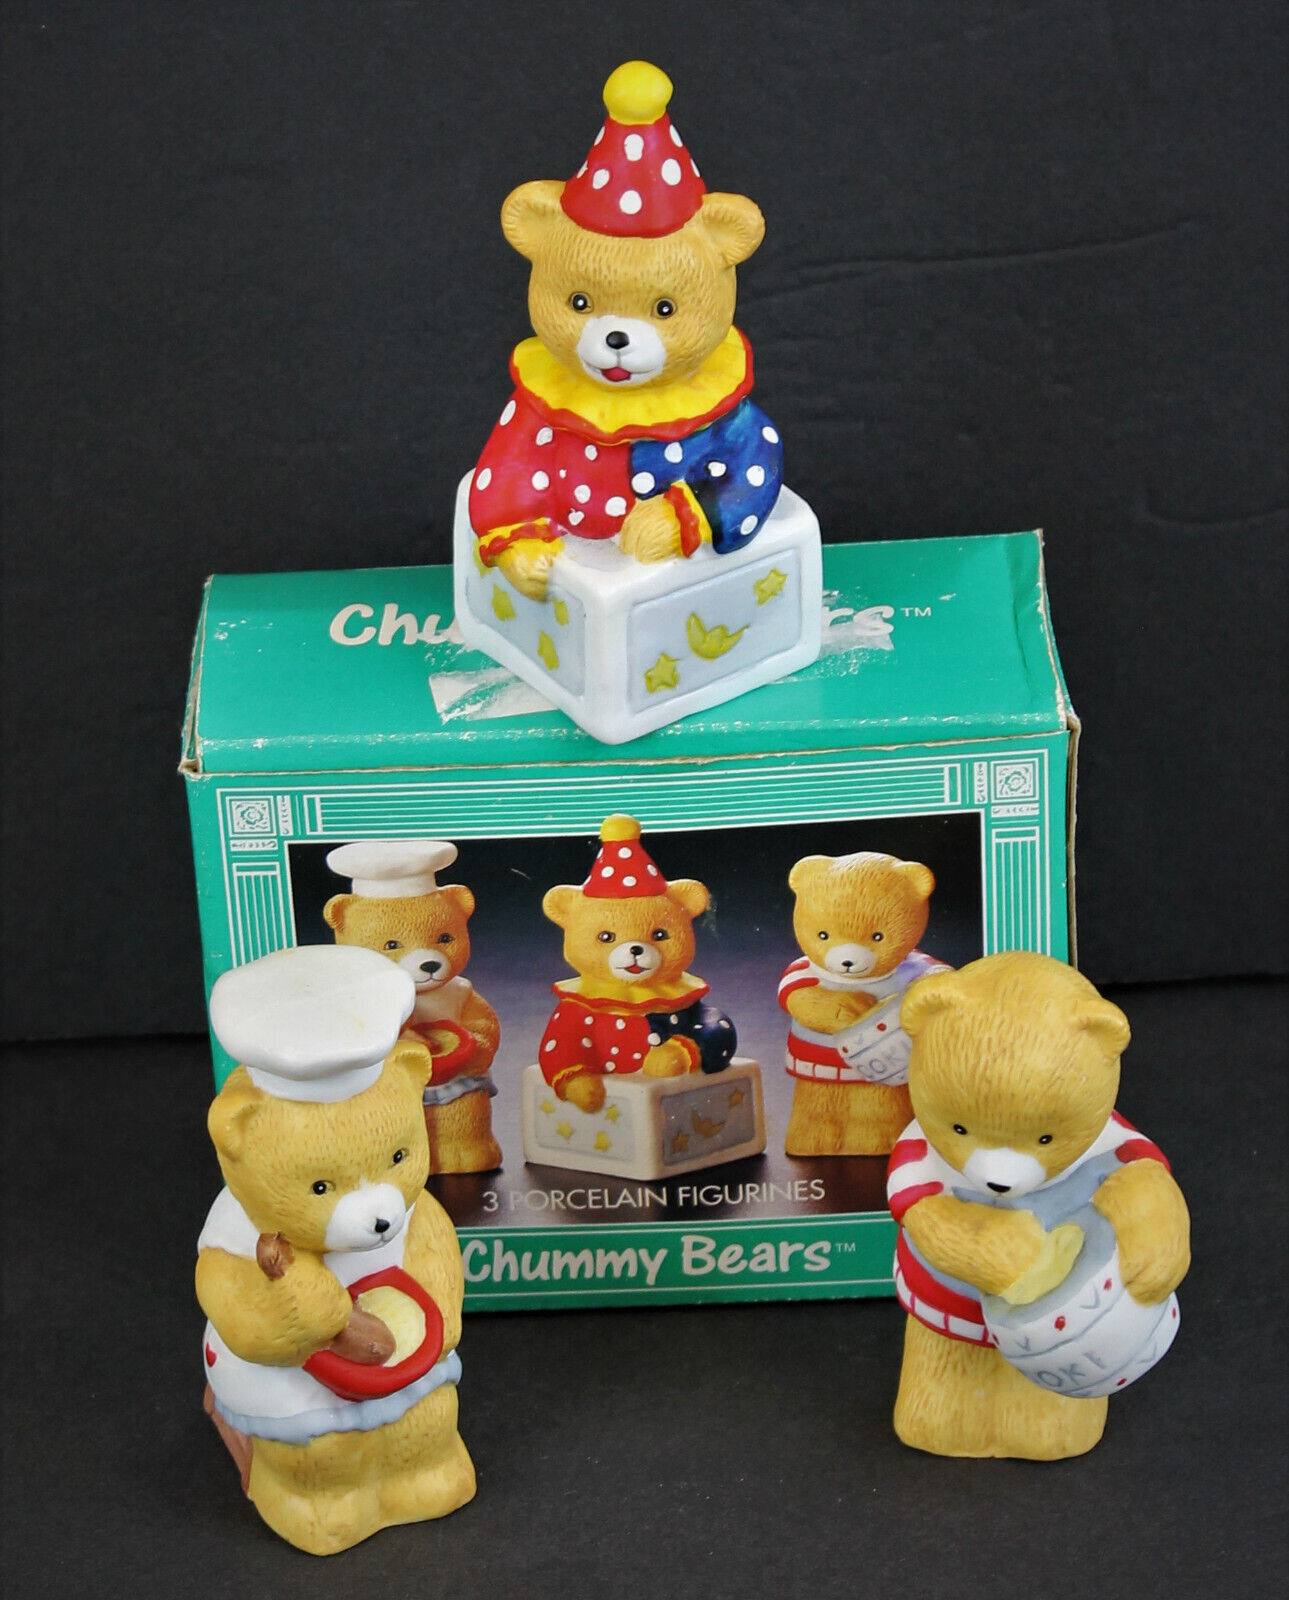 Vintage Porcelain Chummy Bears Figurines Set of 3 Collectible New in Box